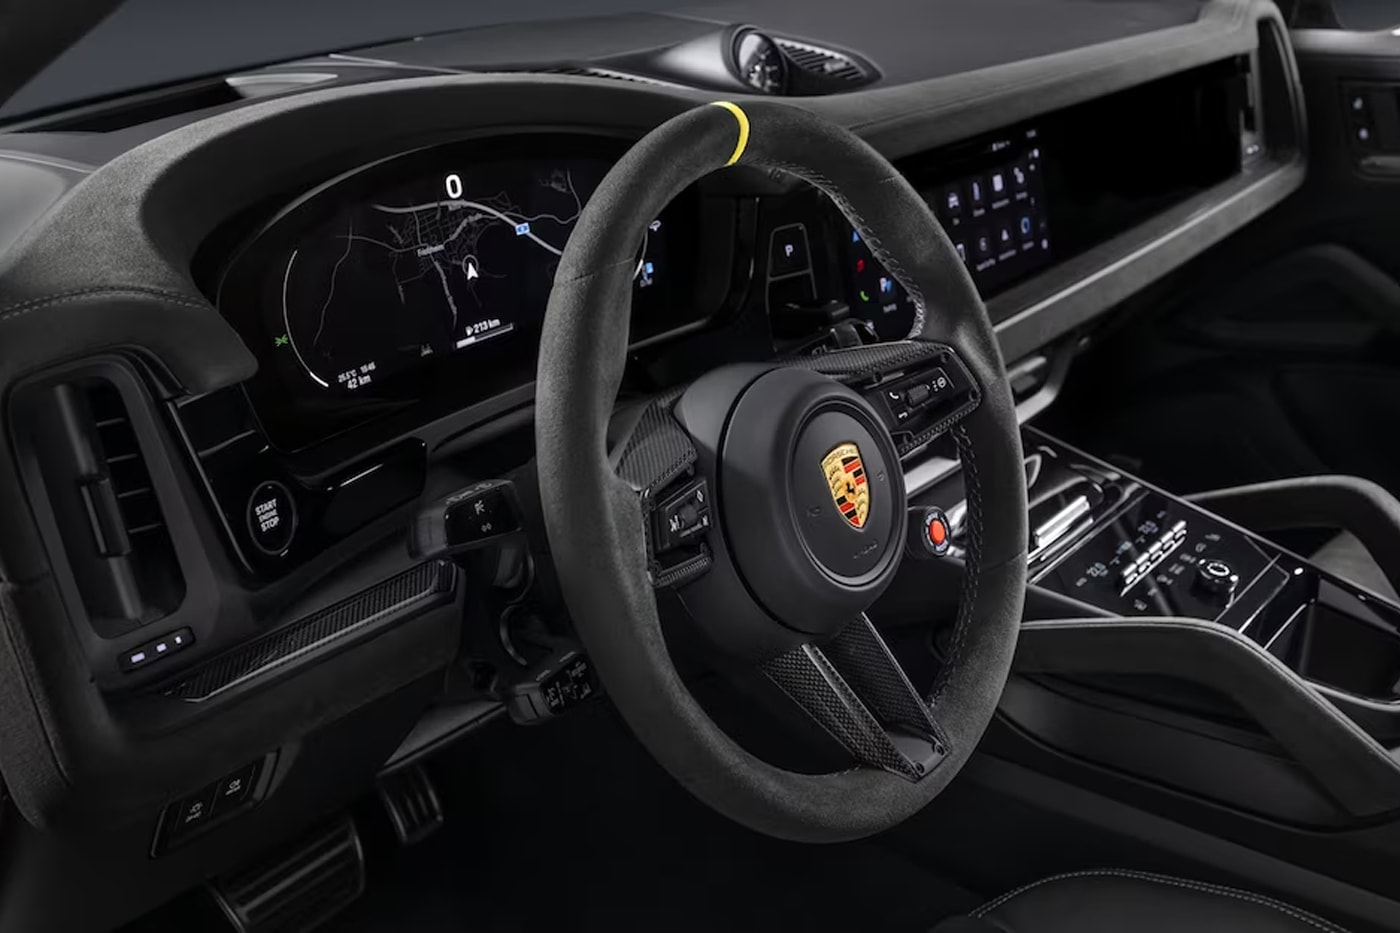 New Porsche Driver Experience makes its debut in the Cayenne